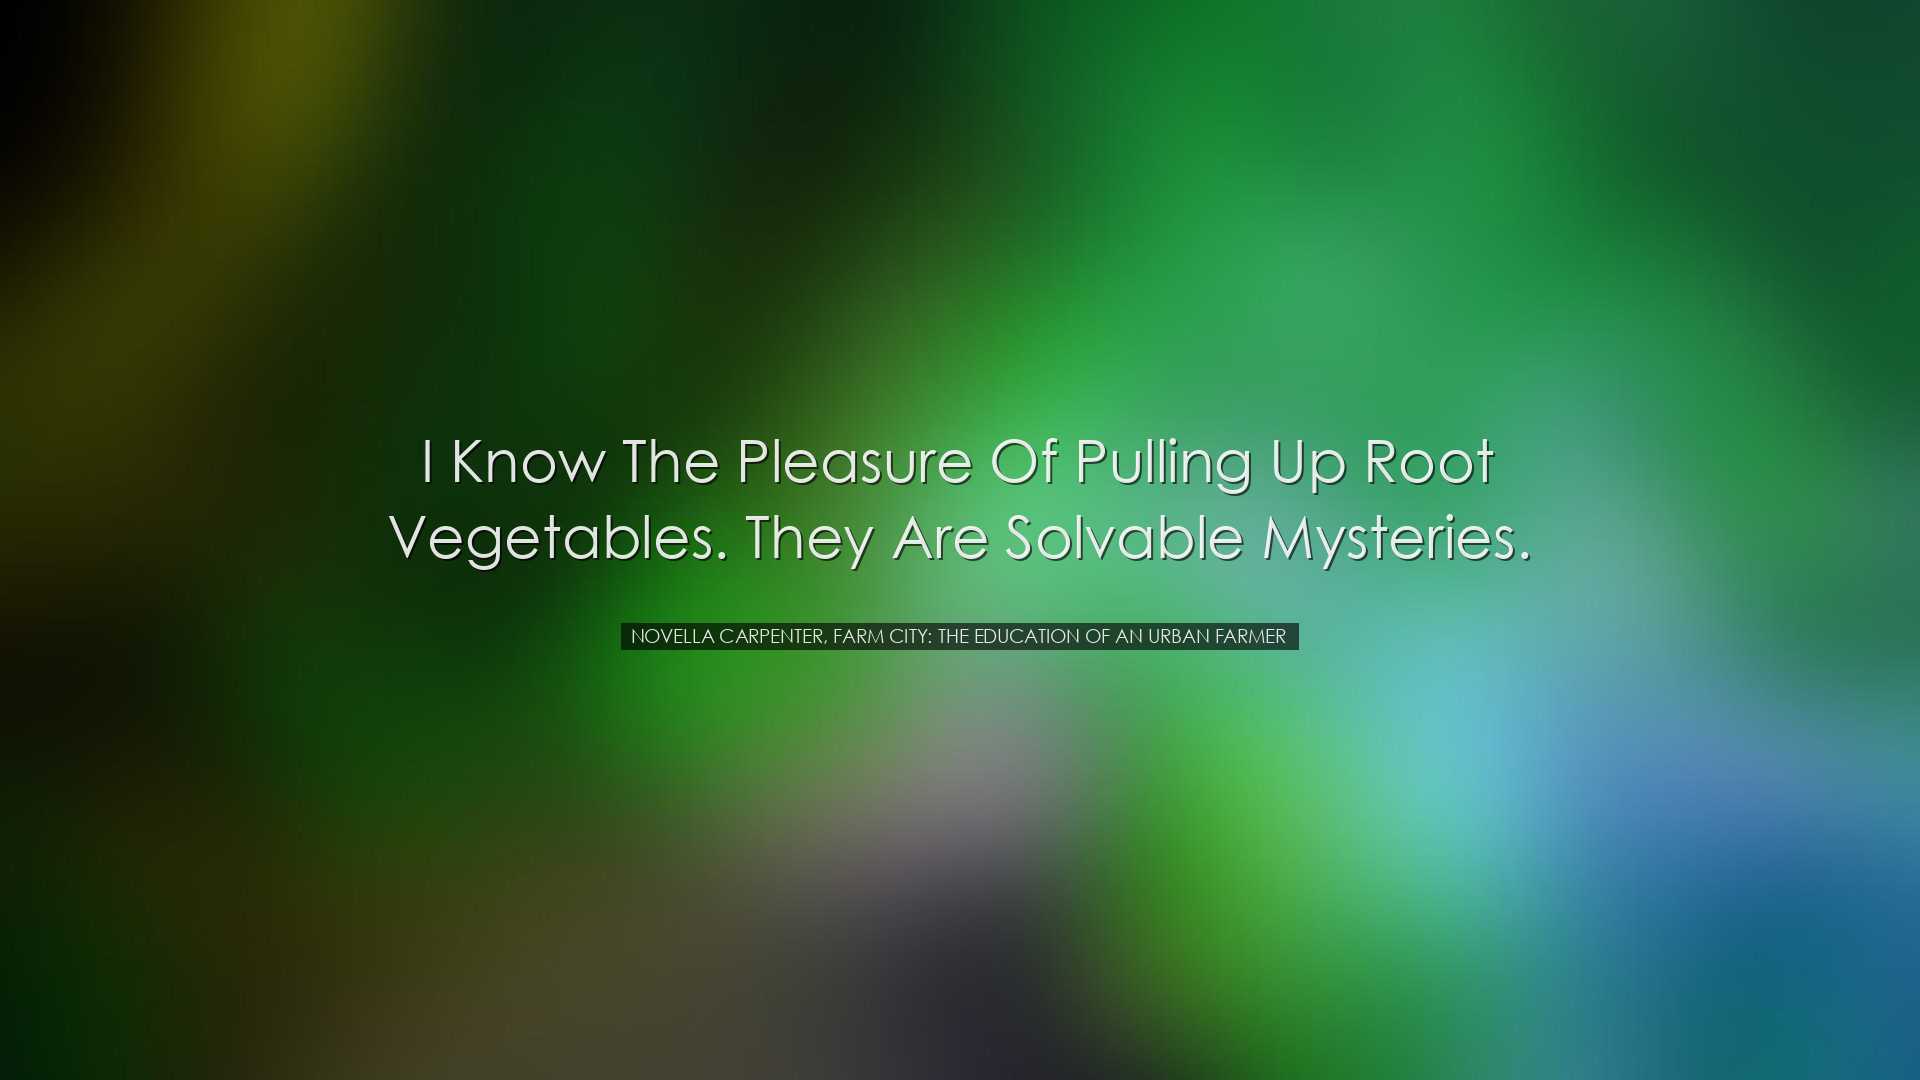 I know the pleasure of pulling up root vegetables. They are solvab